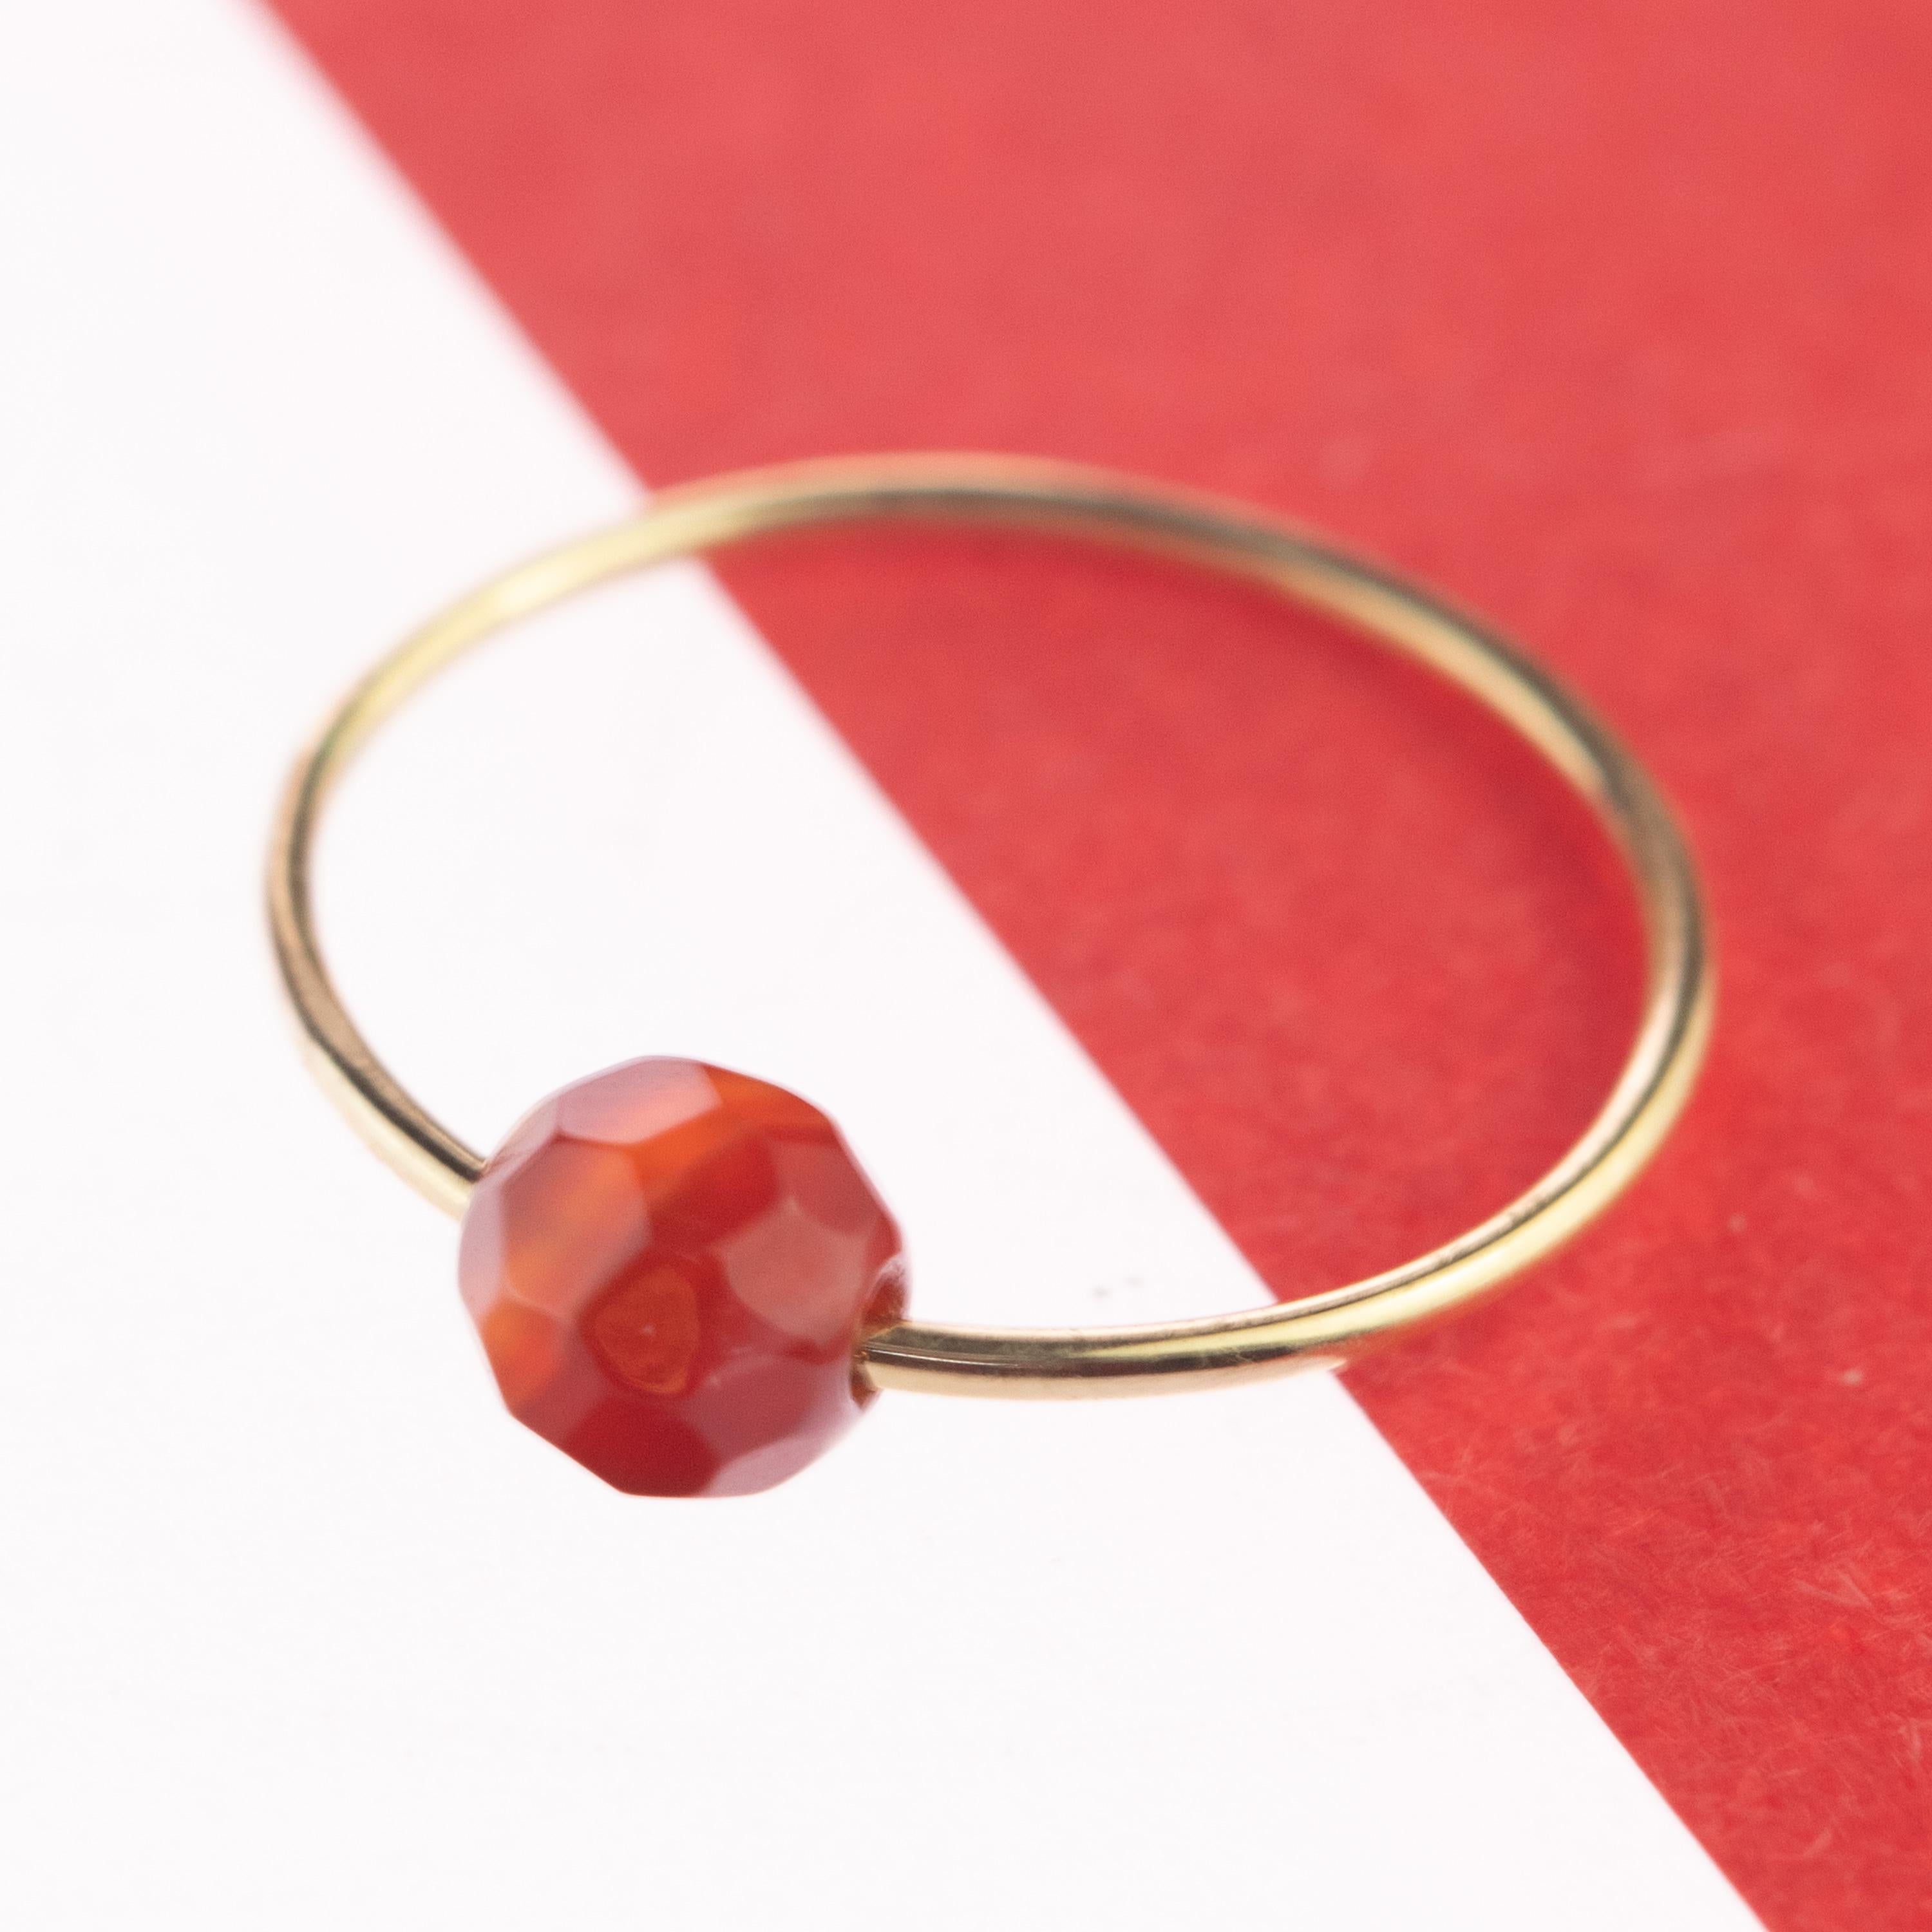 Signature INTINI Jewels Mars Planet ring. Contemporary ring design in 18 karat yellow gold with a precious Faceted Garnet rondelle.  Design and color mixed in one jewel. Delight yourself with a strong, minimalist design, just for a stunning chic